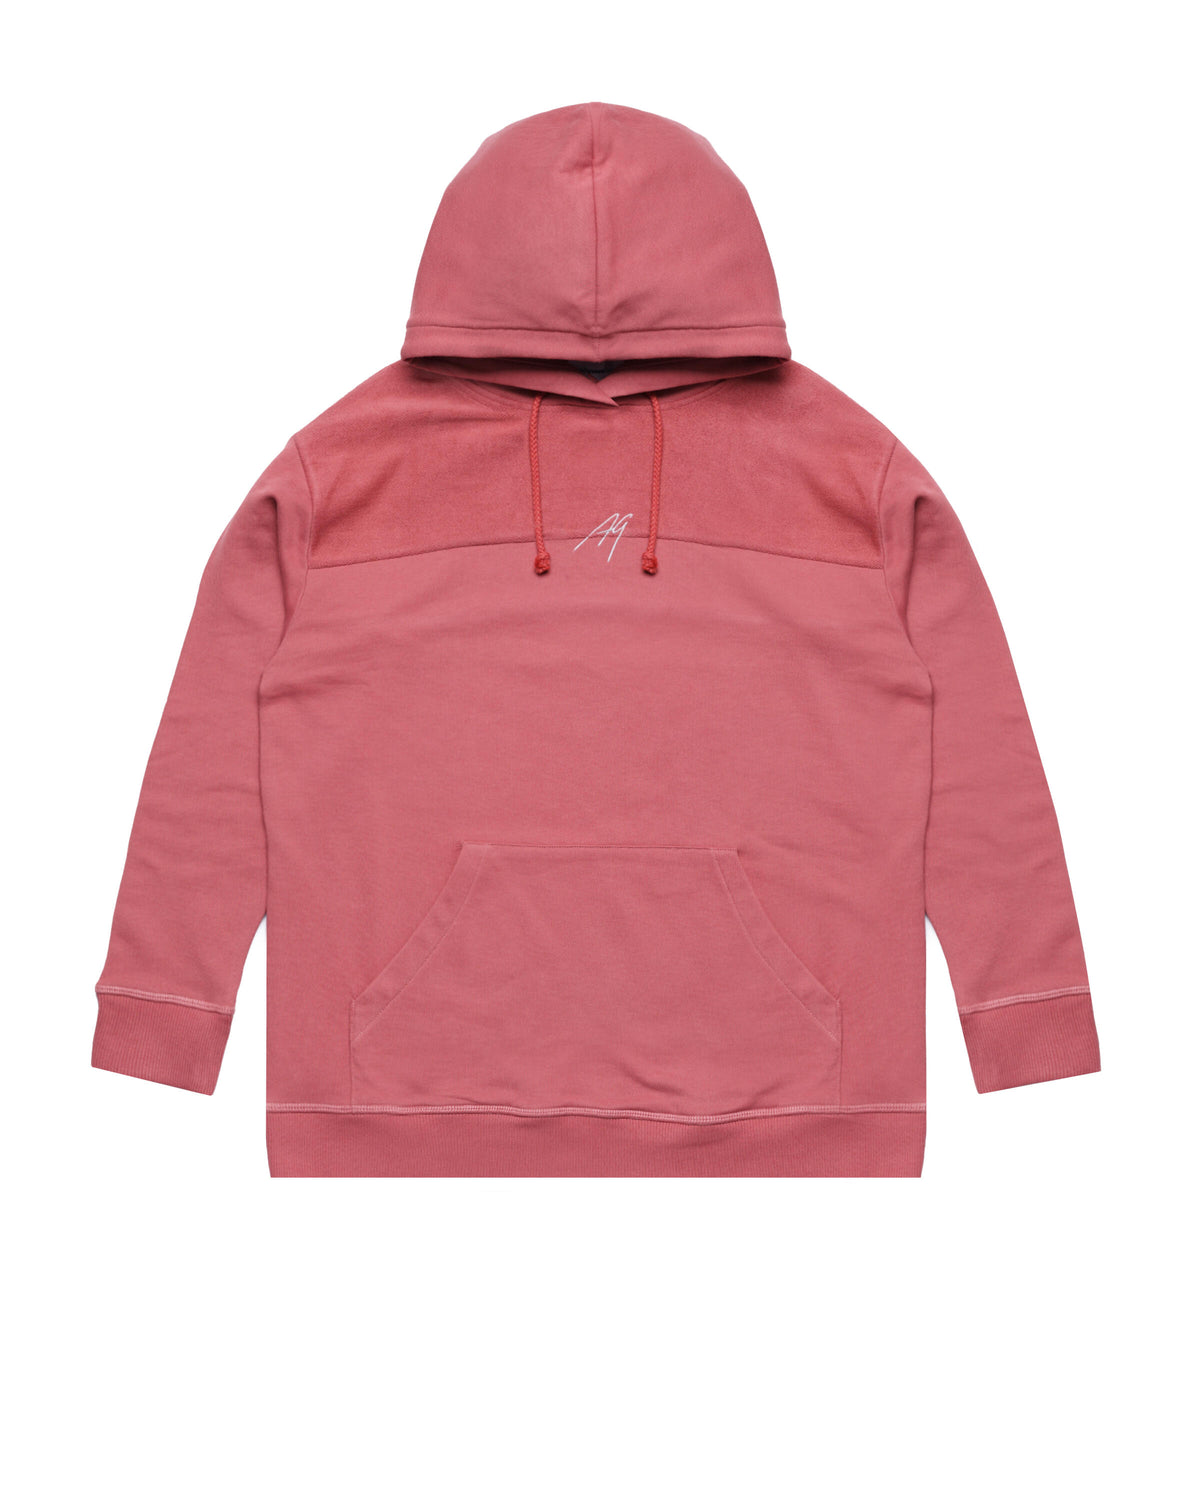 Afew Goods Made by Culture Hoody "Marsala"